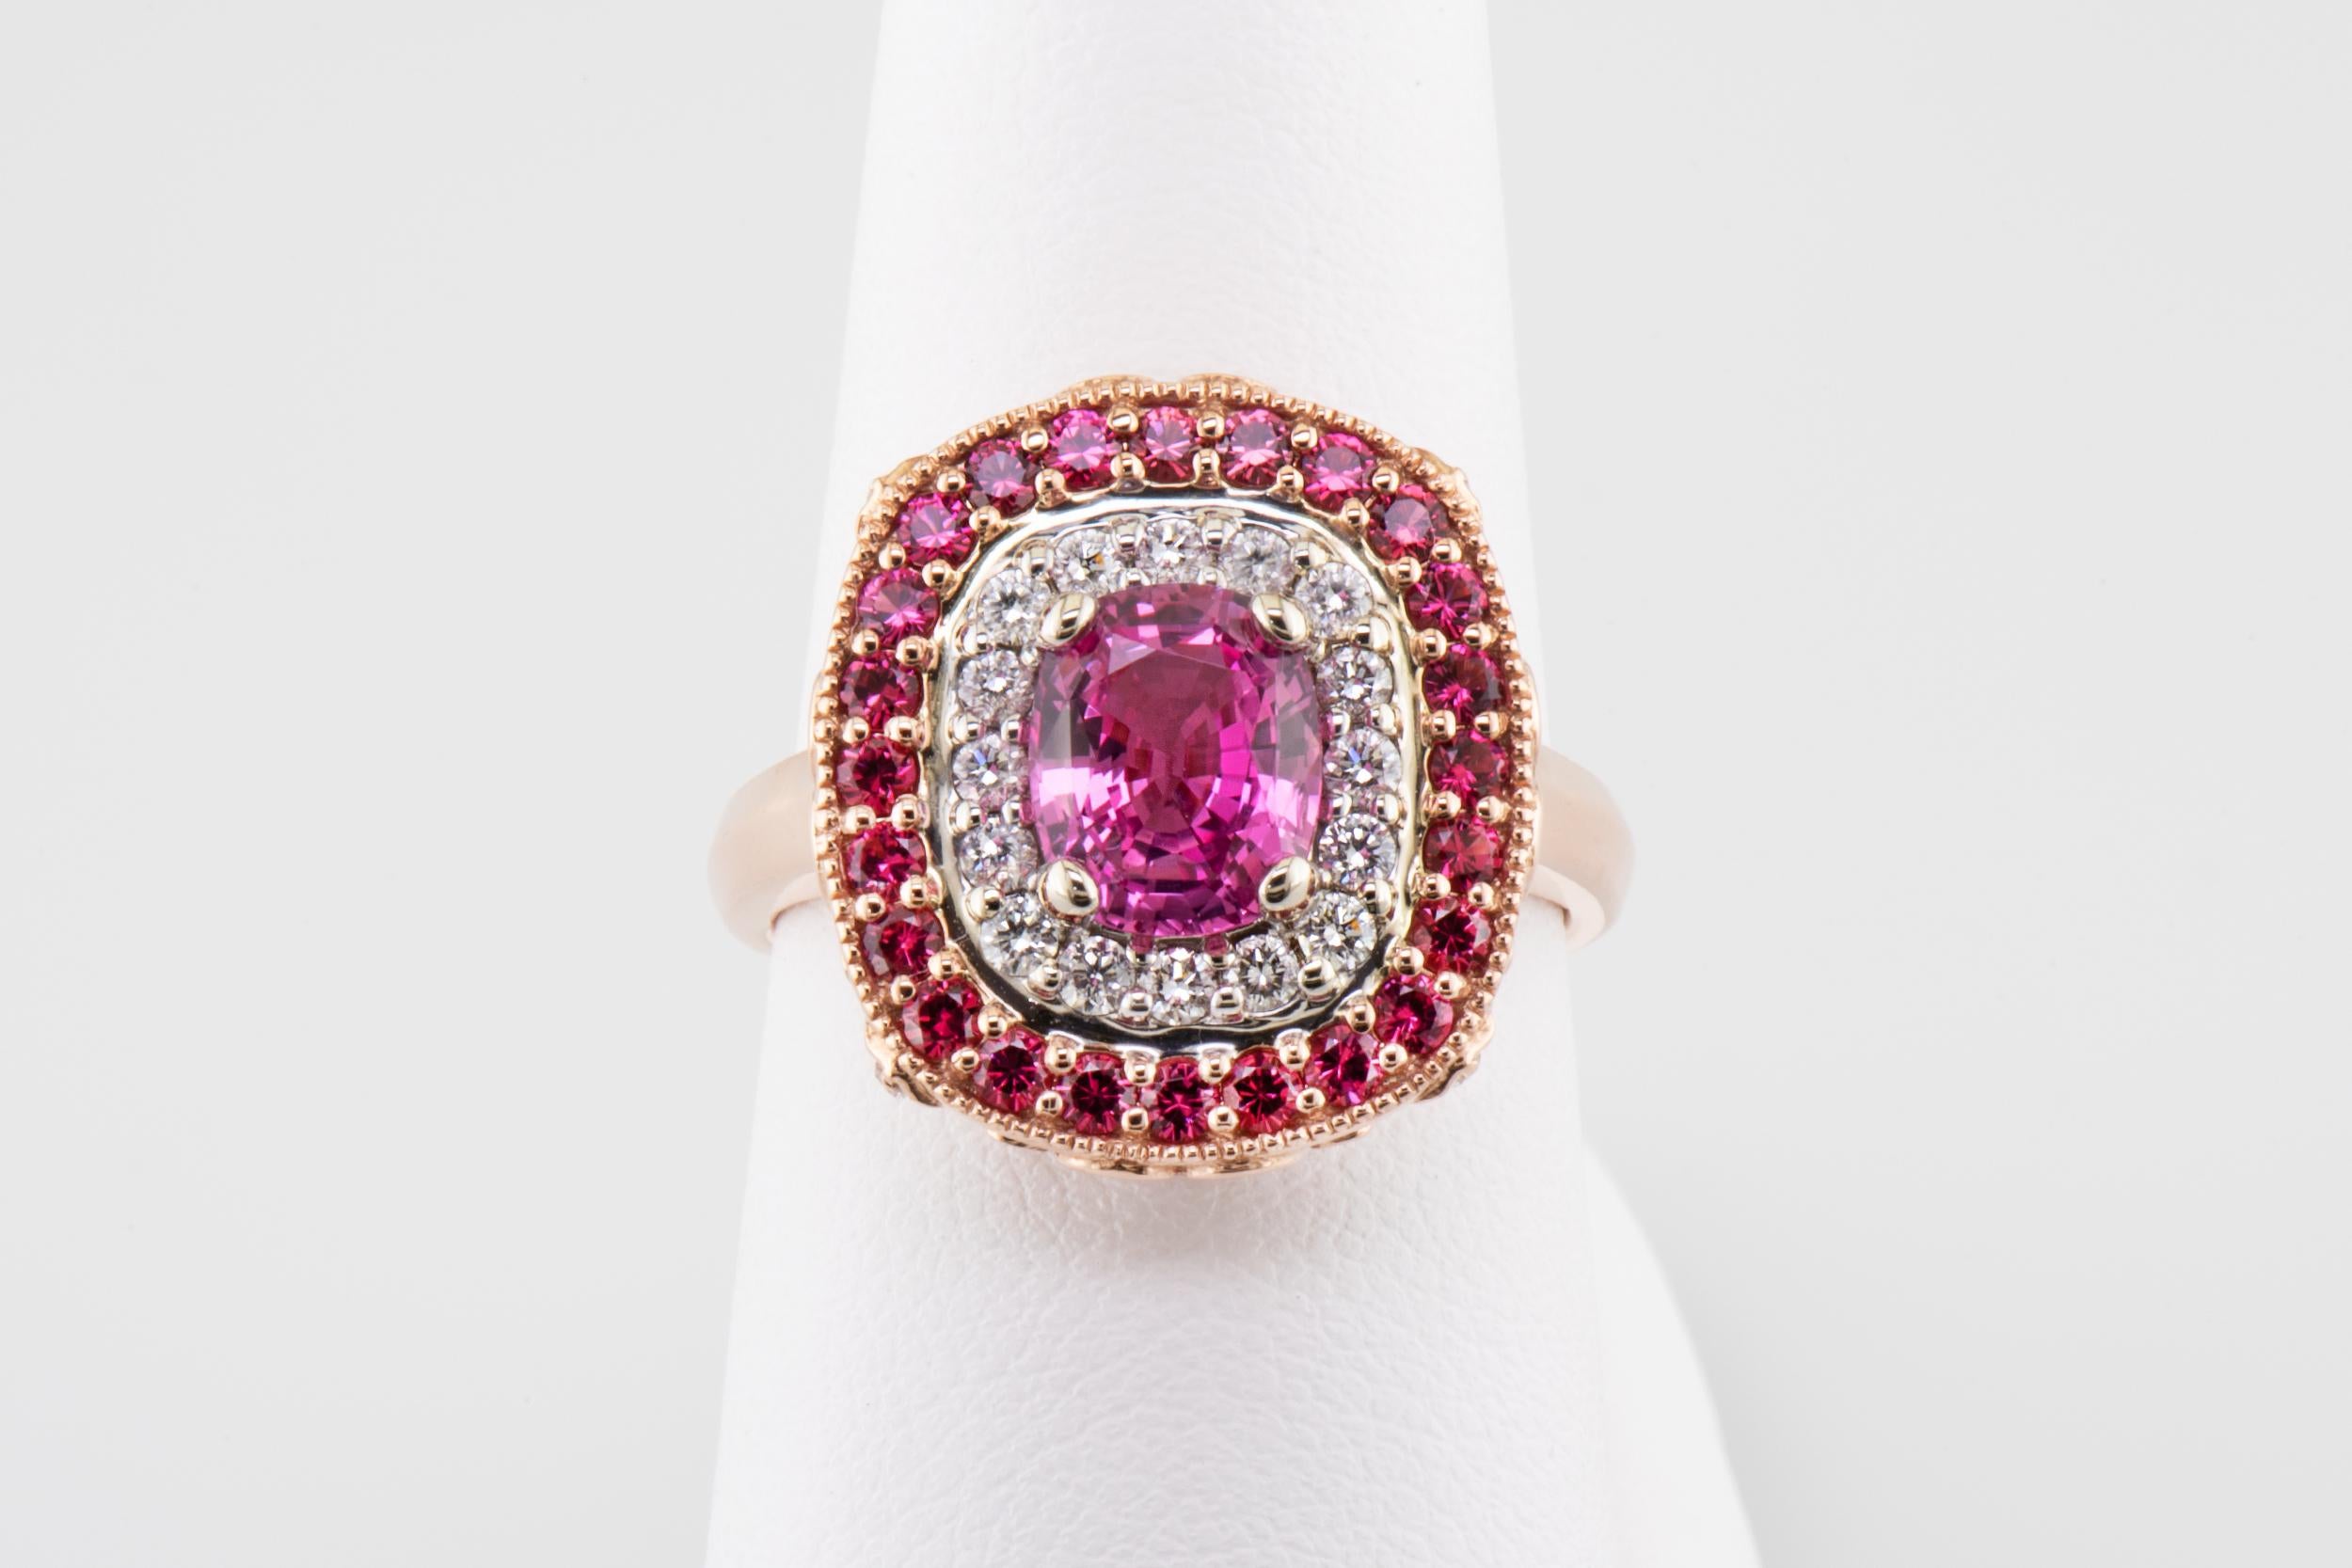 1.64 Carat Sri Lanka Pink Sapphire No Heat Ring with Pink Spinel Diamond Halo

This spectacularly sparkly fashion ring is two-tone 14 karat rose and white gold. The center gem is a 1.64 carat natural, no heat, pink sapphire, it is surrounded by a